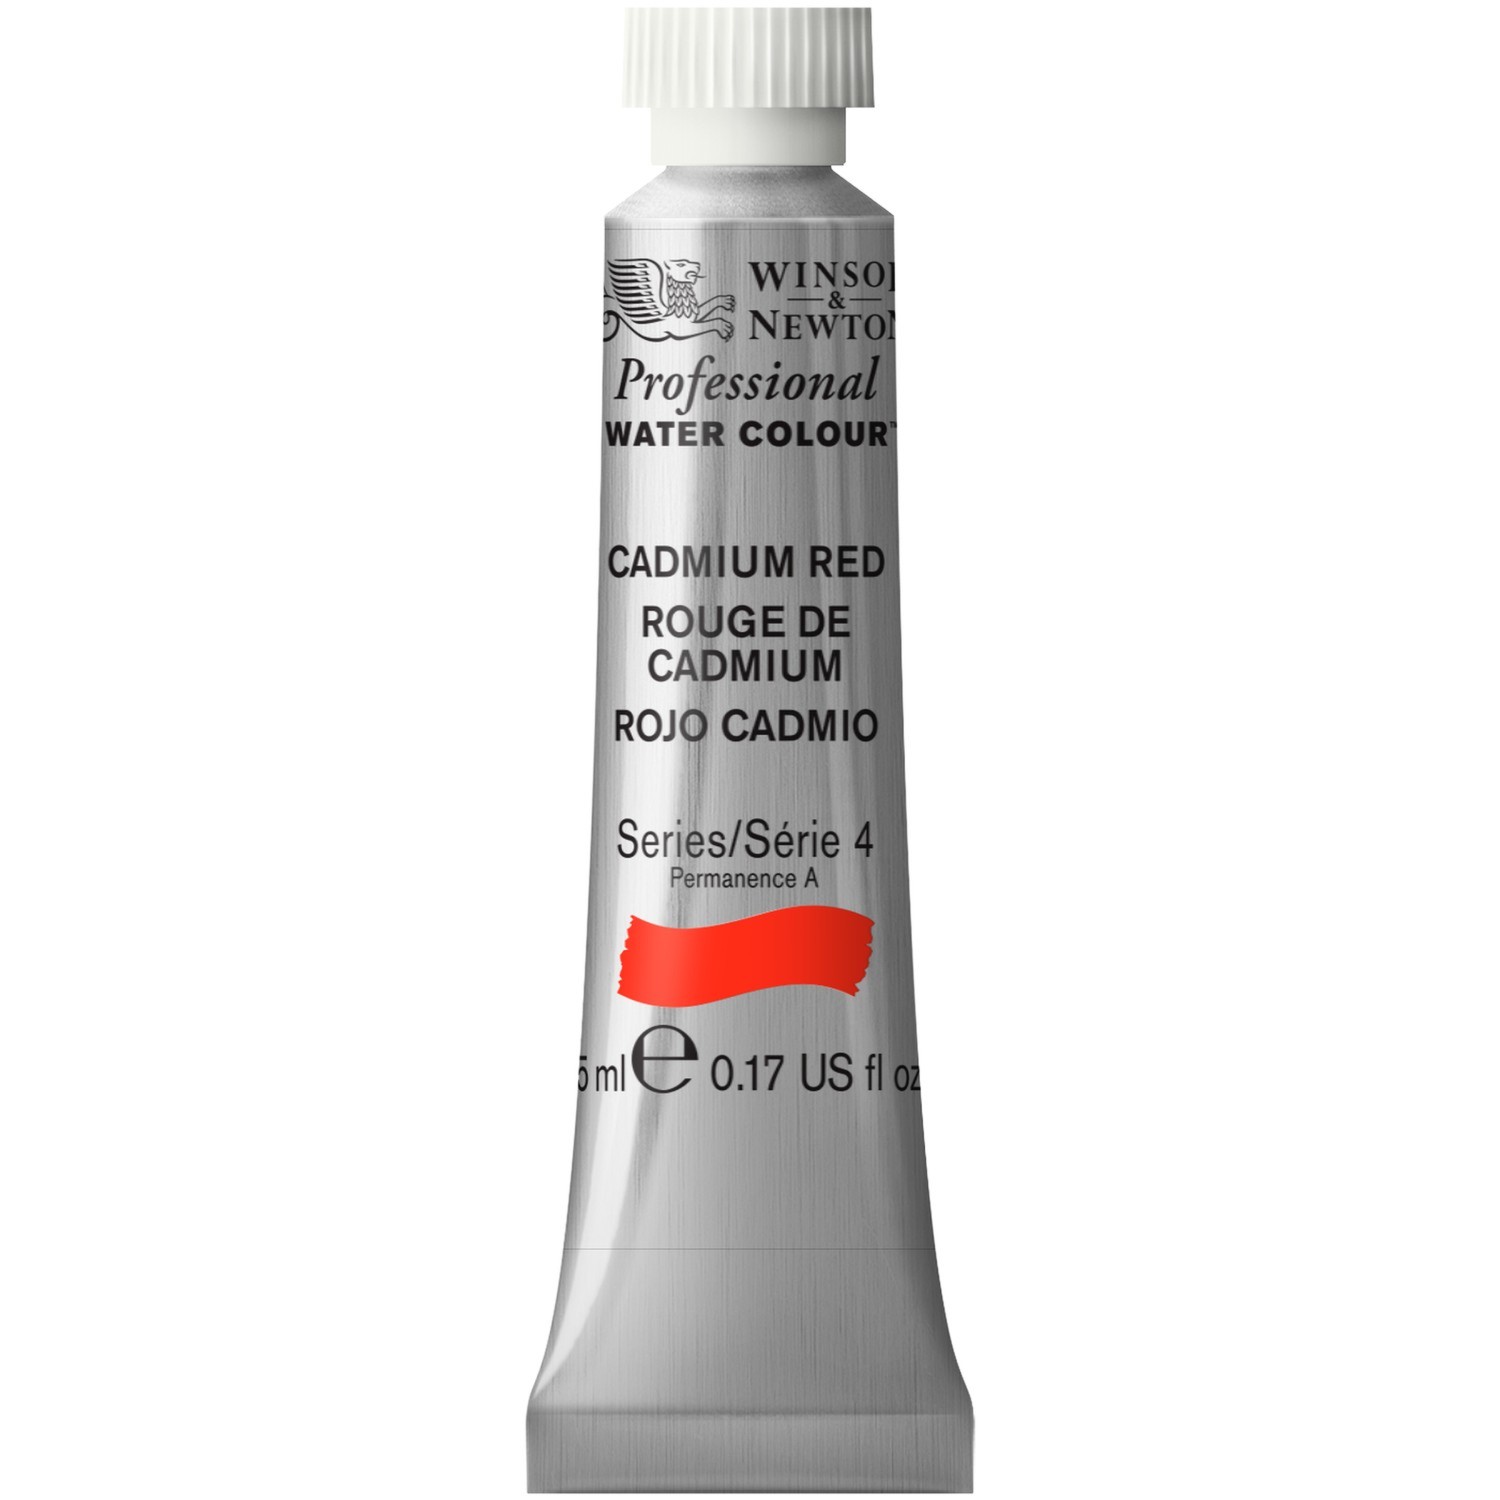 Winsor and Newton 5ml Professional Watercolour Paint - Cadium Red Image 1